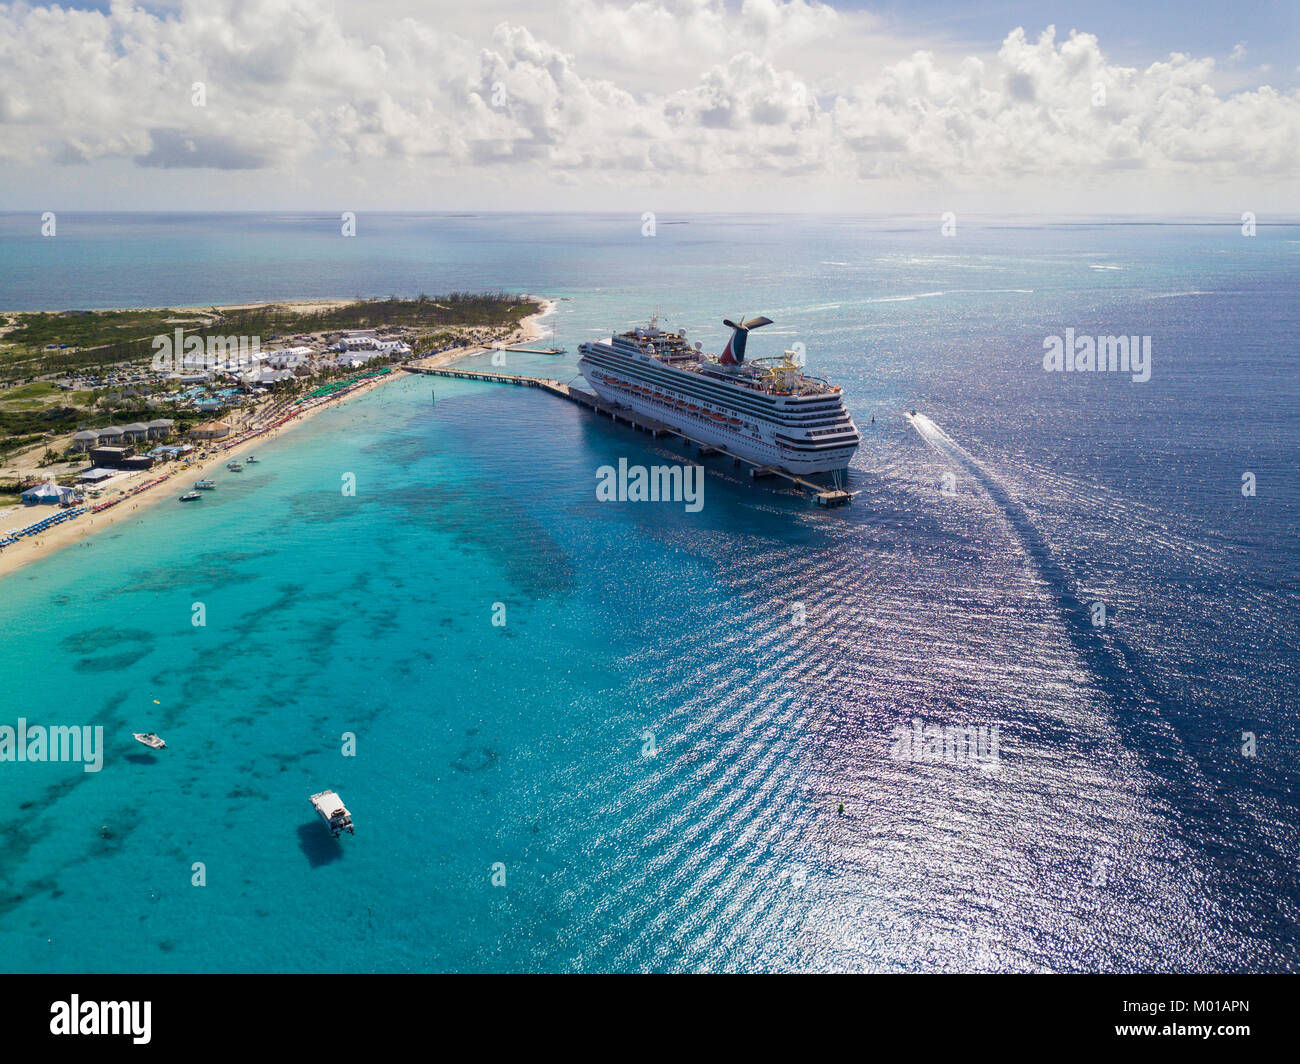 GRAND TURK, TURKS AND CAICOS-DECEMBER 11, 2017: The Carnival Sunshine cruise ship docks in Grand Turk in the Turks and Caicos Islands in this aerial v Stock Photo